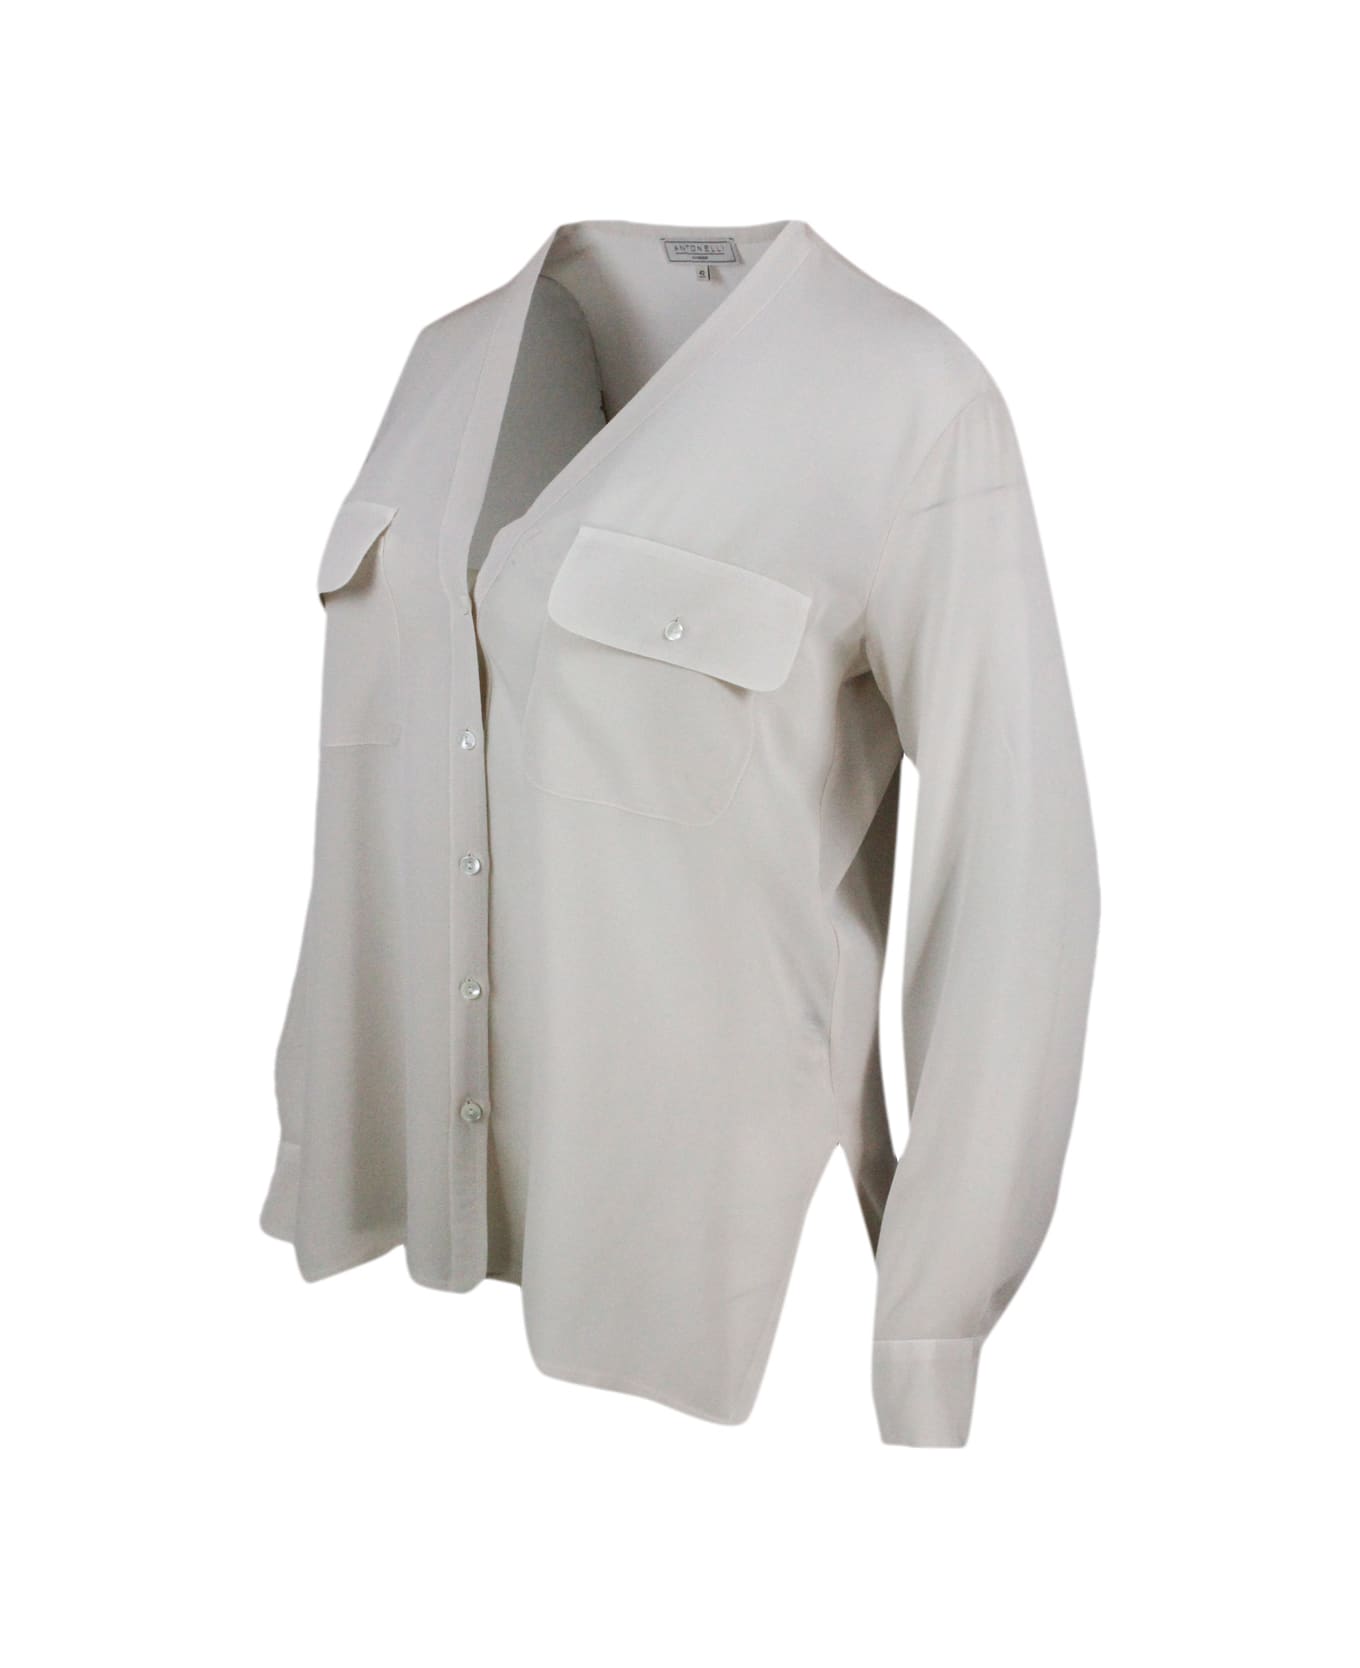 Antonelli Shirt Made Of Soft Stretch Silk, With V-neck, Chest Pockets And Button Closure - Beige